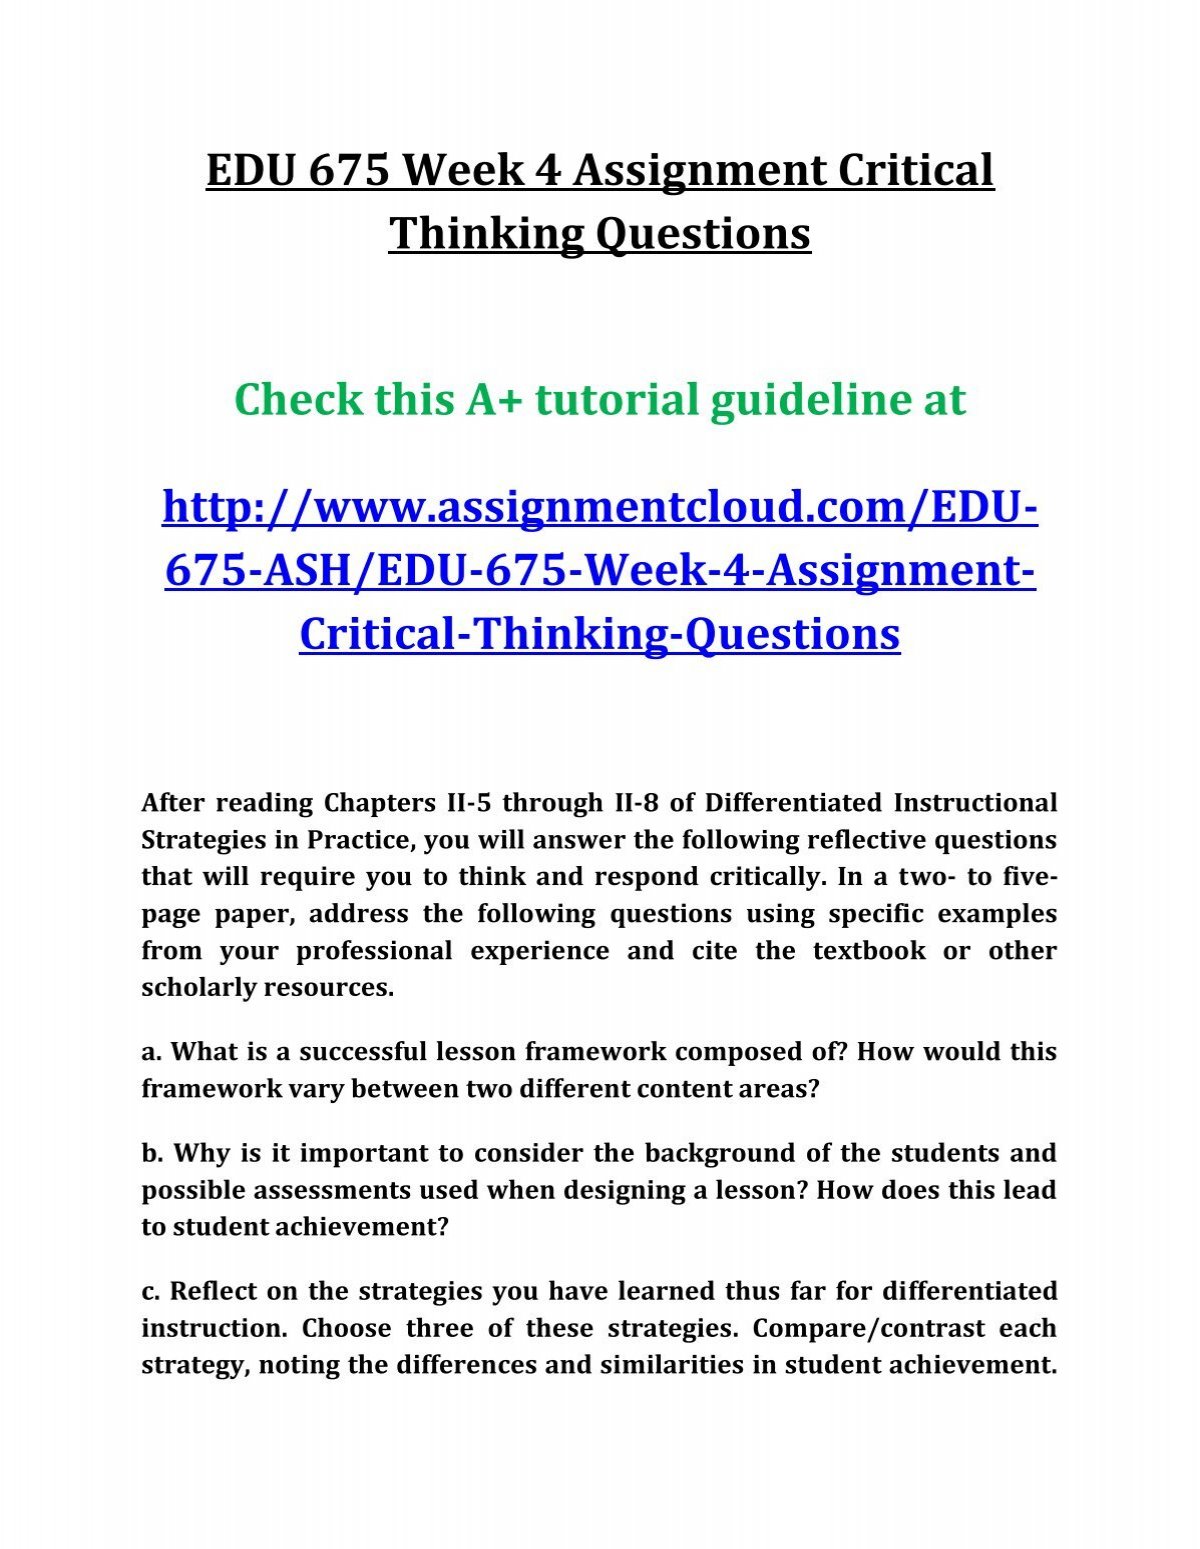 week 7 assignment critical thinking activity quizlet